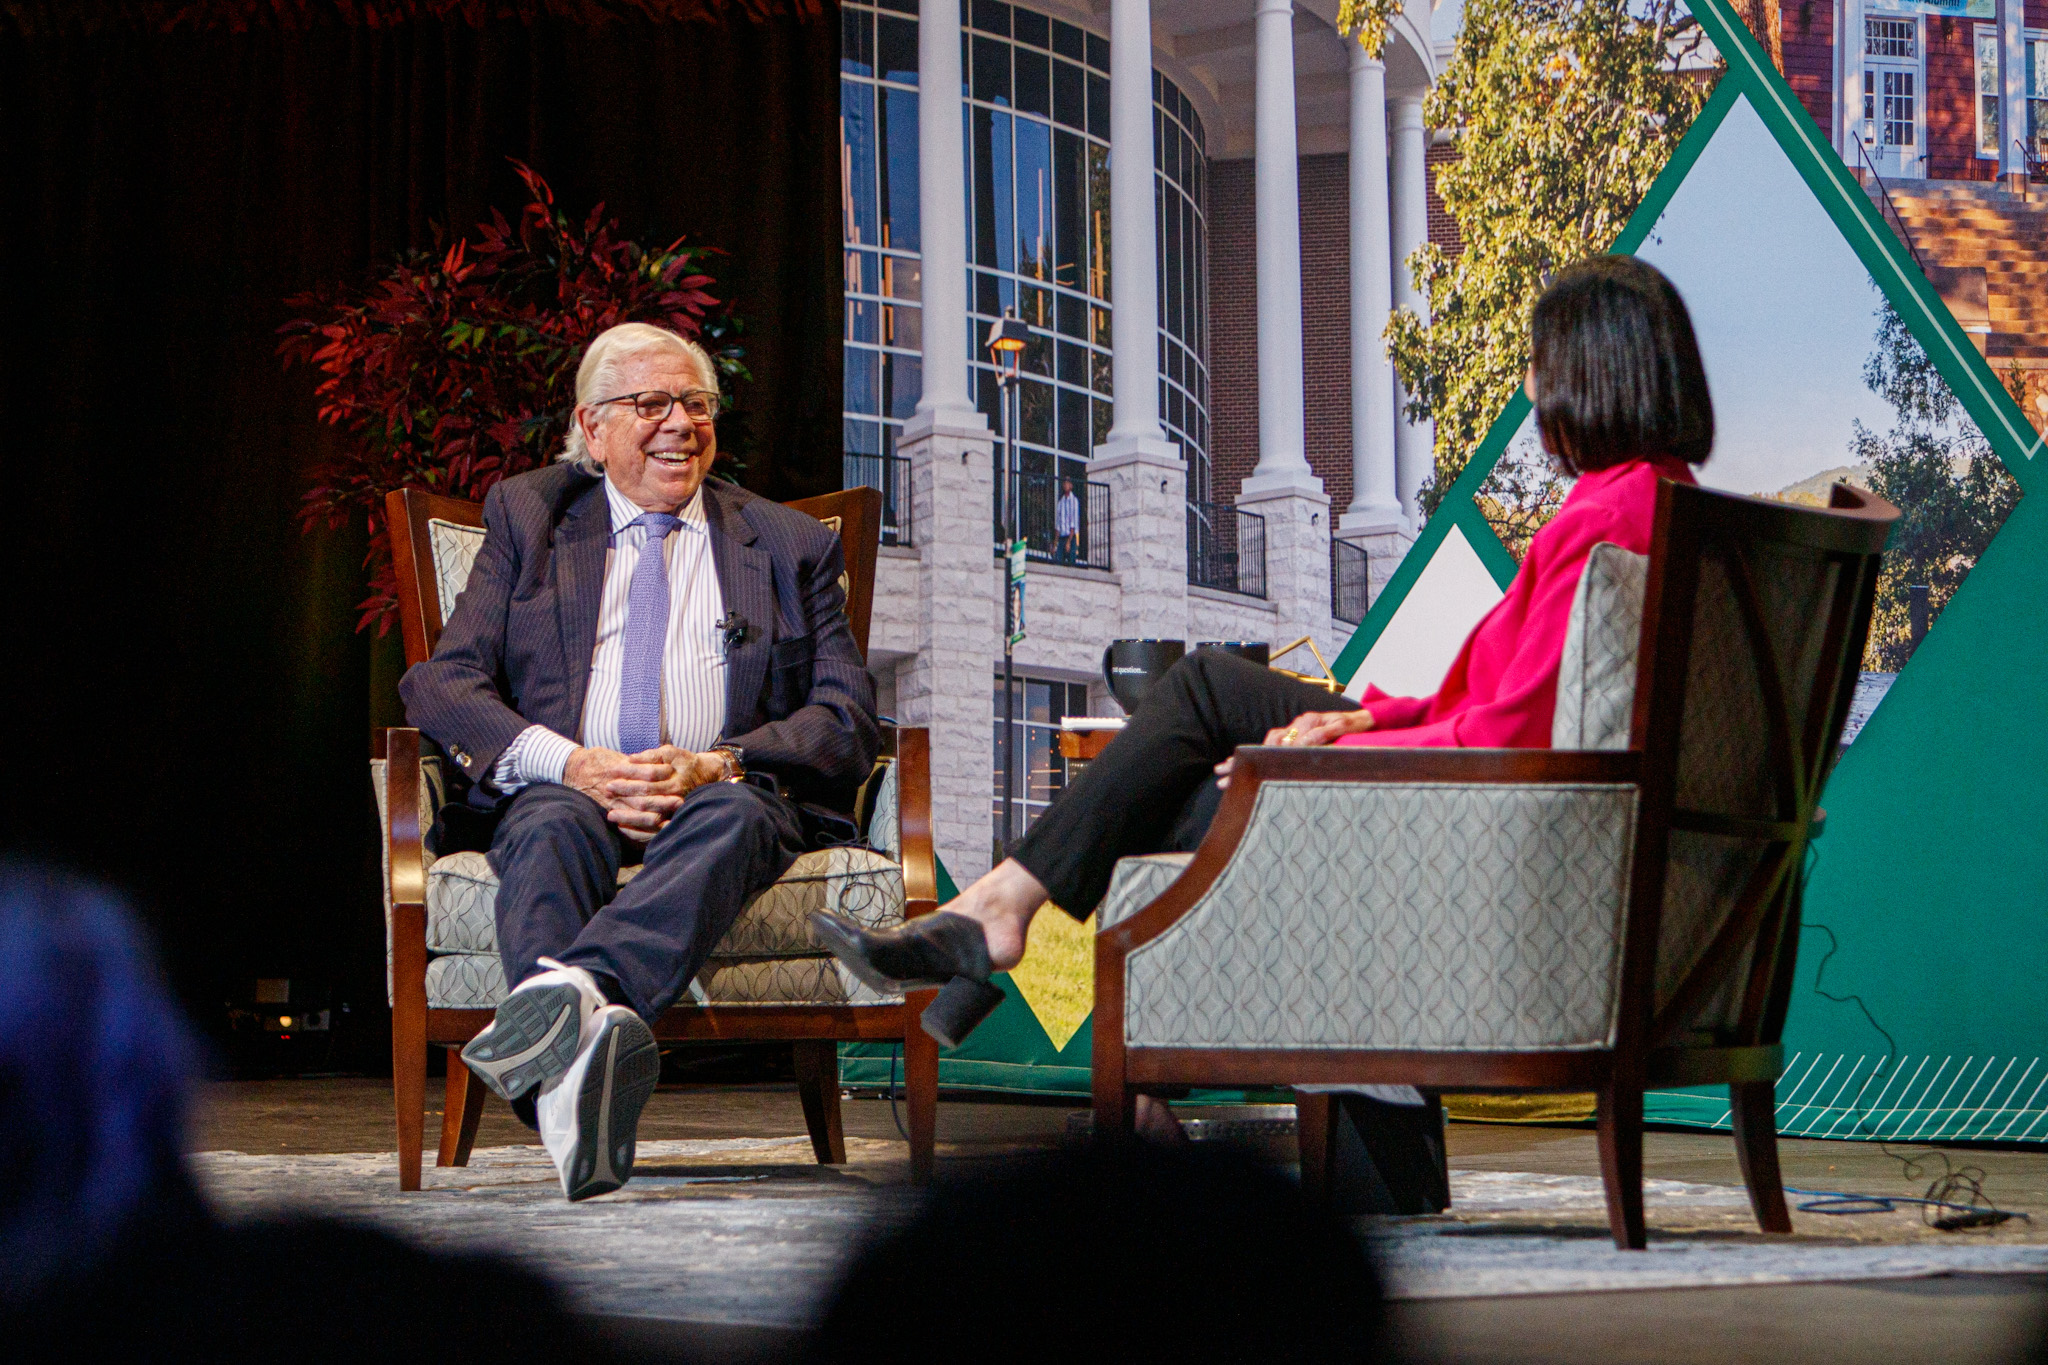 Carl Bernstein, pictured on stage during his talk discussing journalists' role in the media